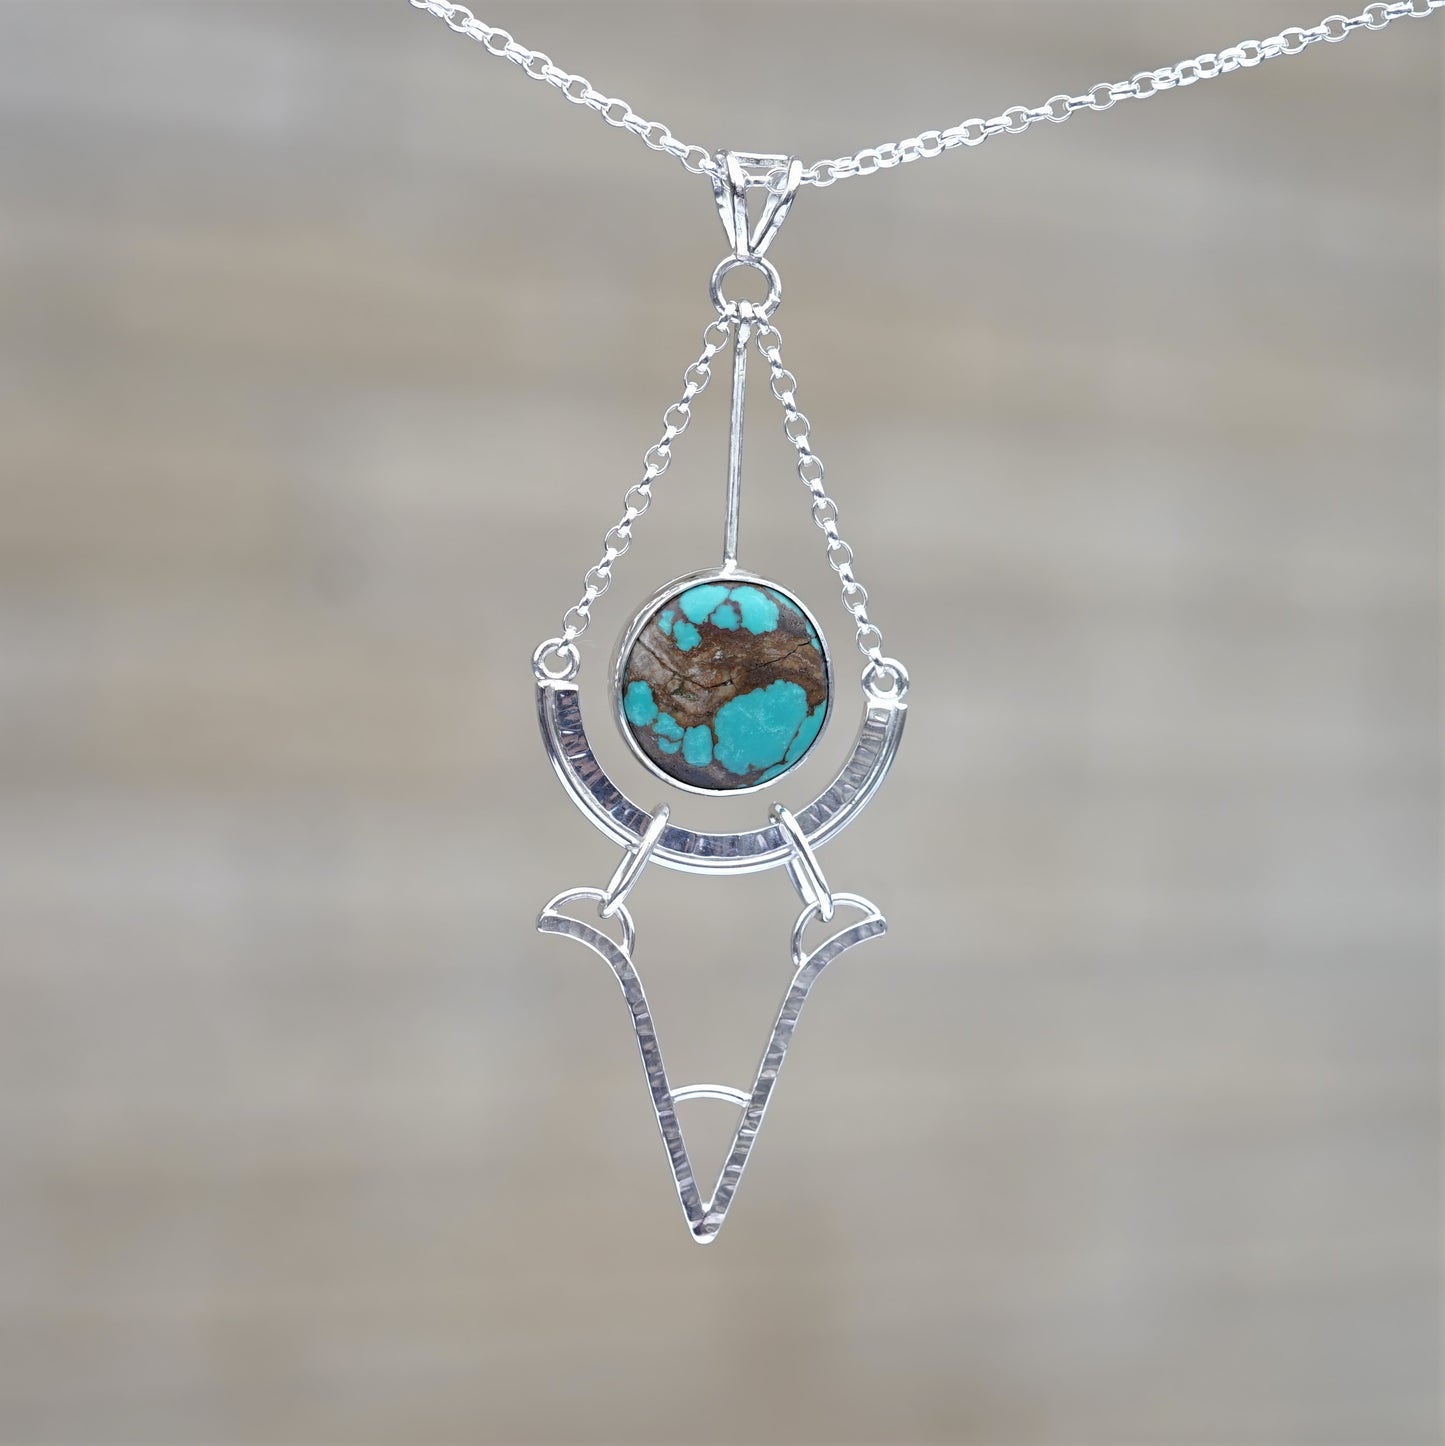 Tibetan Turquoise and 925 Sterling Silver Pendant (B)